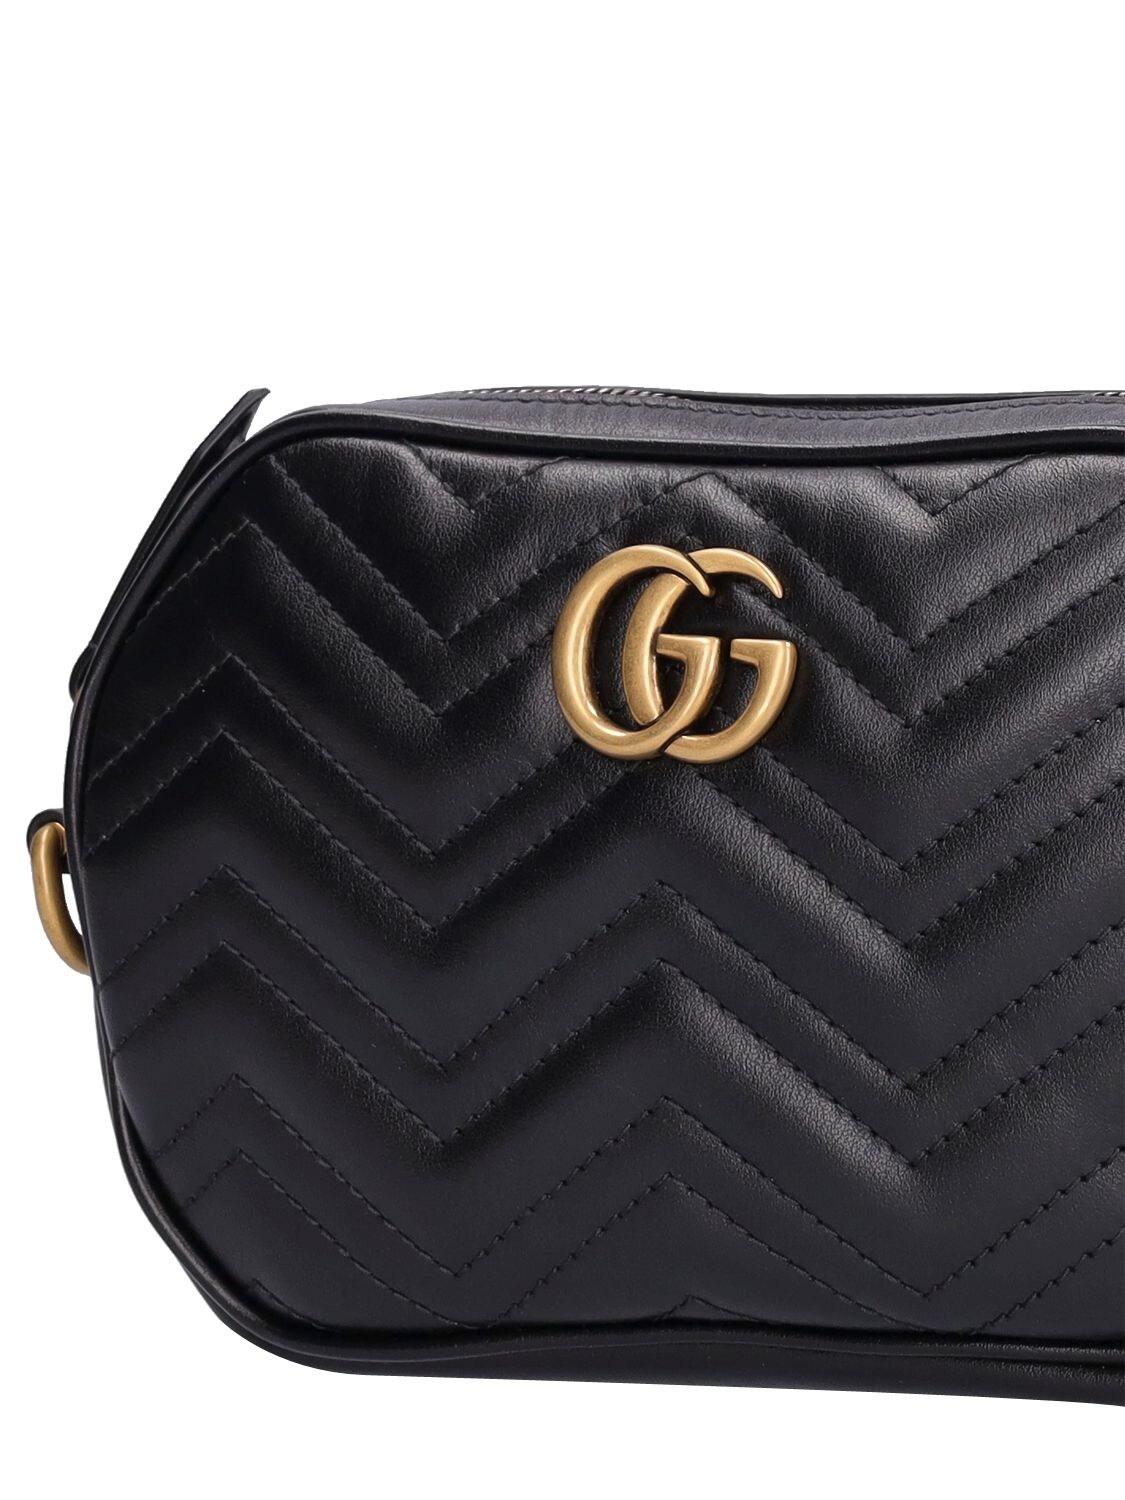 Gucci - Women's GG Marmont Camera 2.0 Mini Quilted Shoulder Bag - Black - Leather